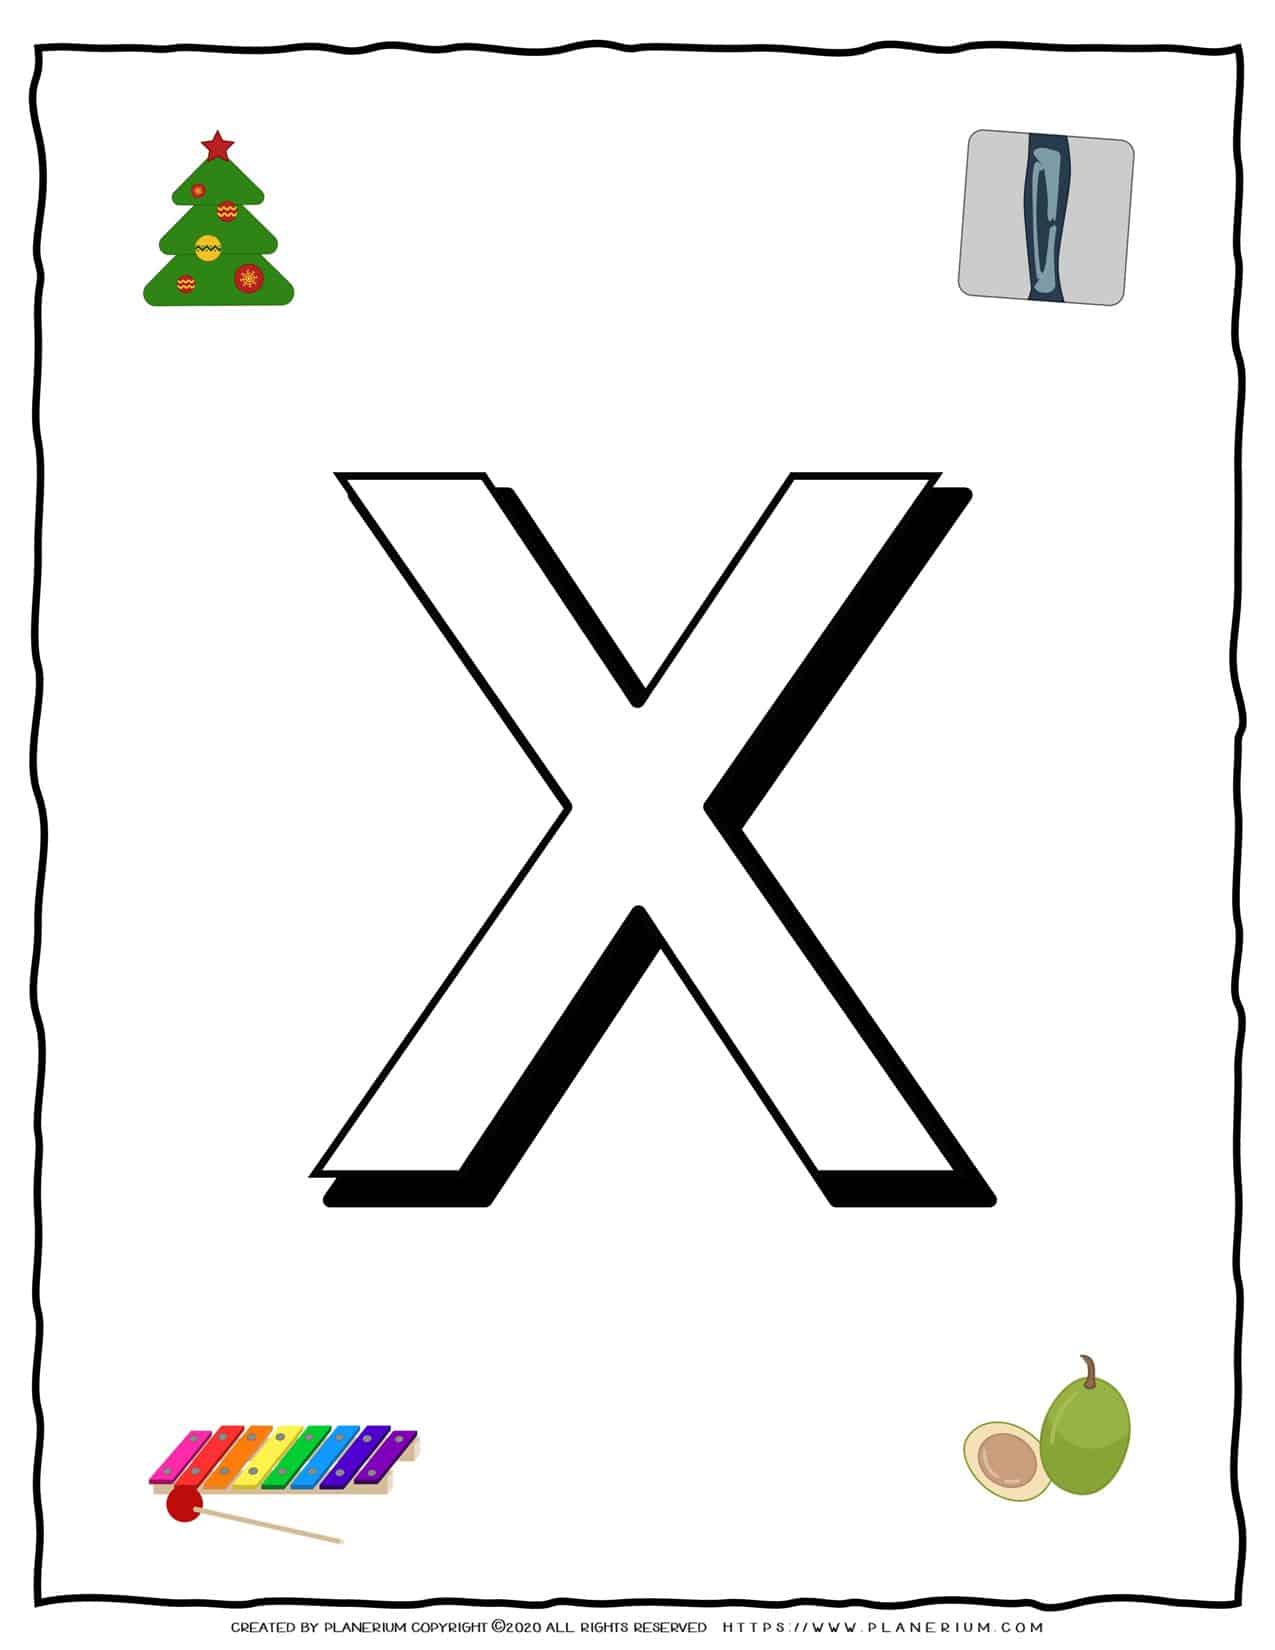 objects that start with the letter x